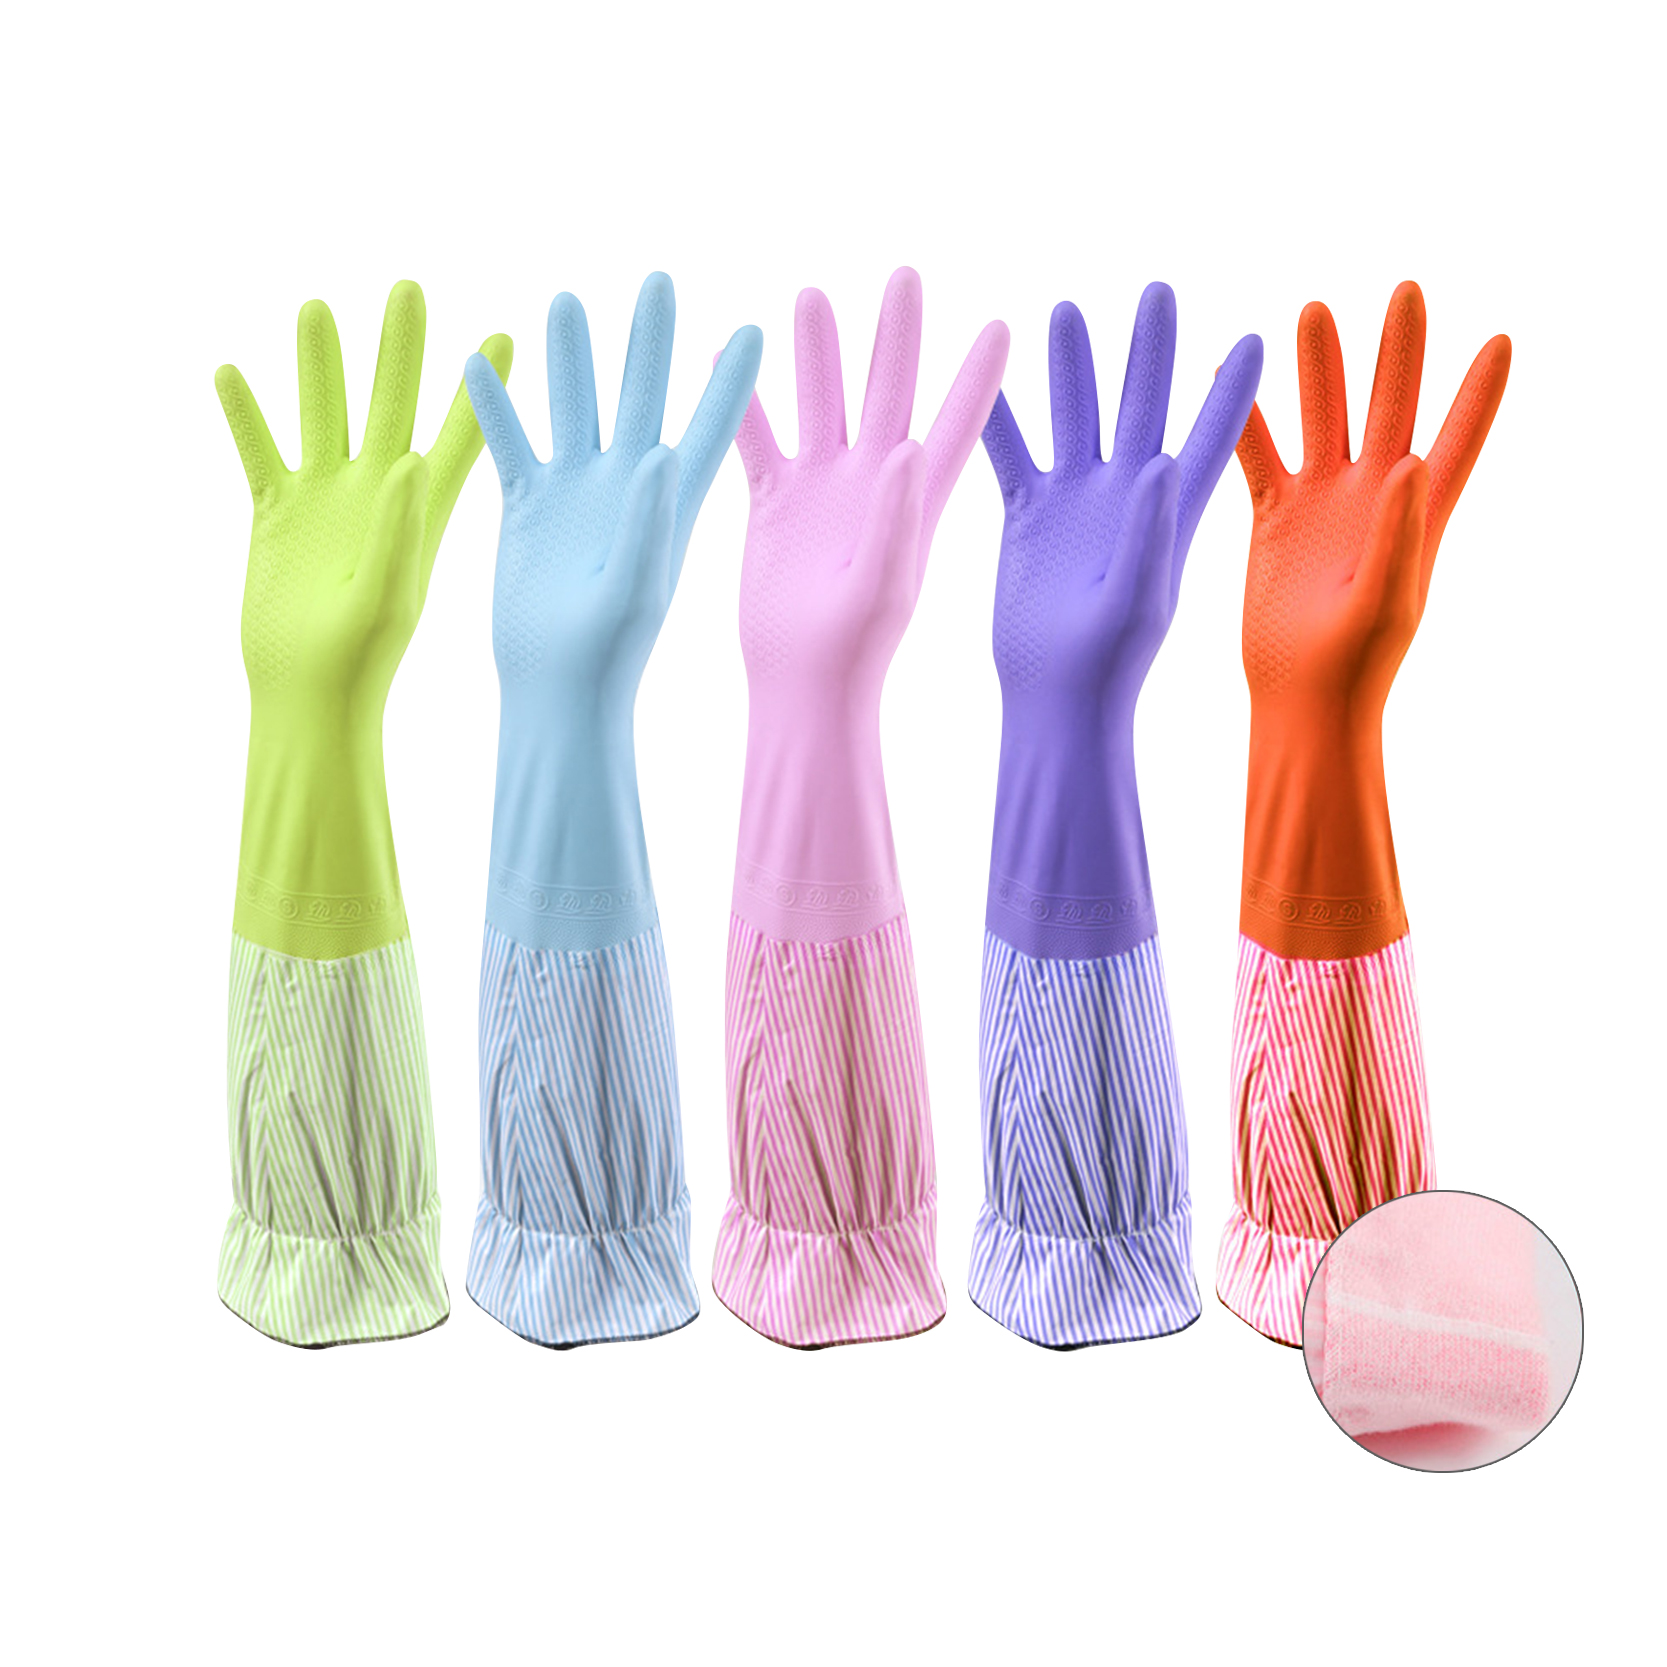 Rubber Latex Gloves Clean Long Gloves Winter Work Safety Gloves Woman Clean Tool Waterproof Dishwashing Household